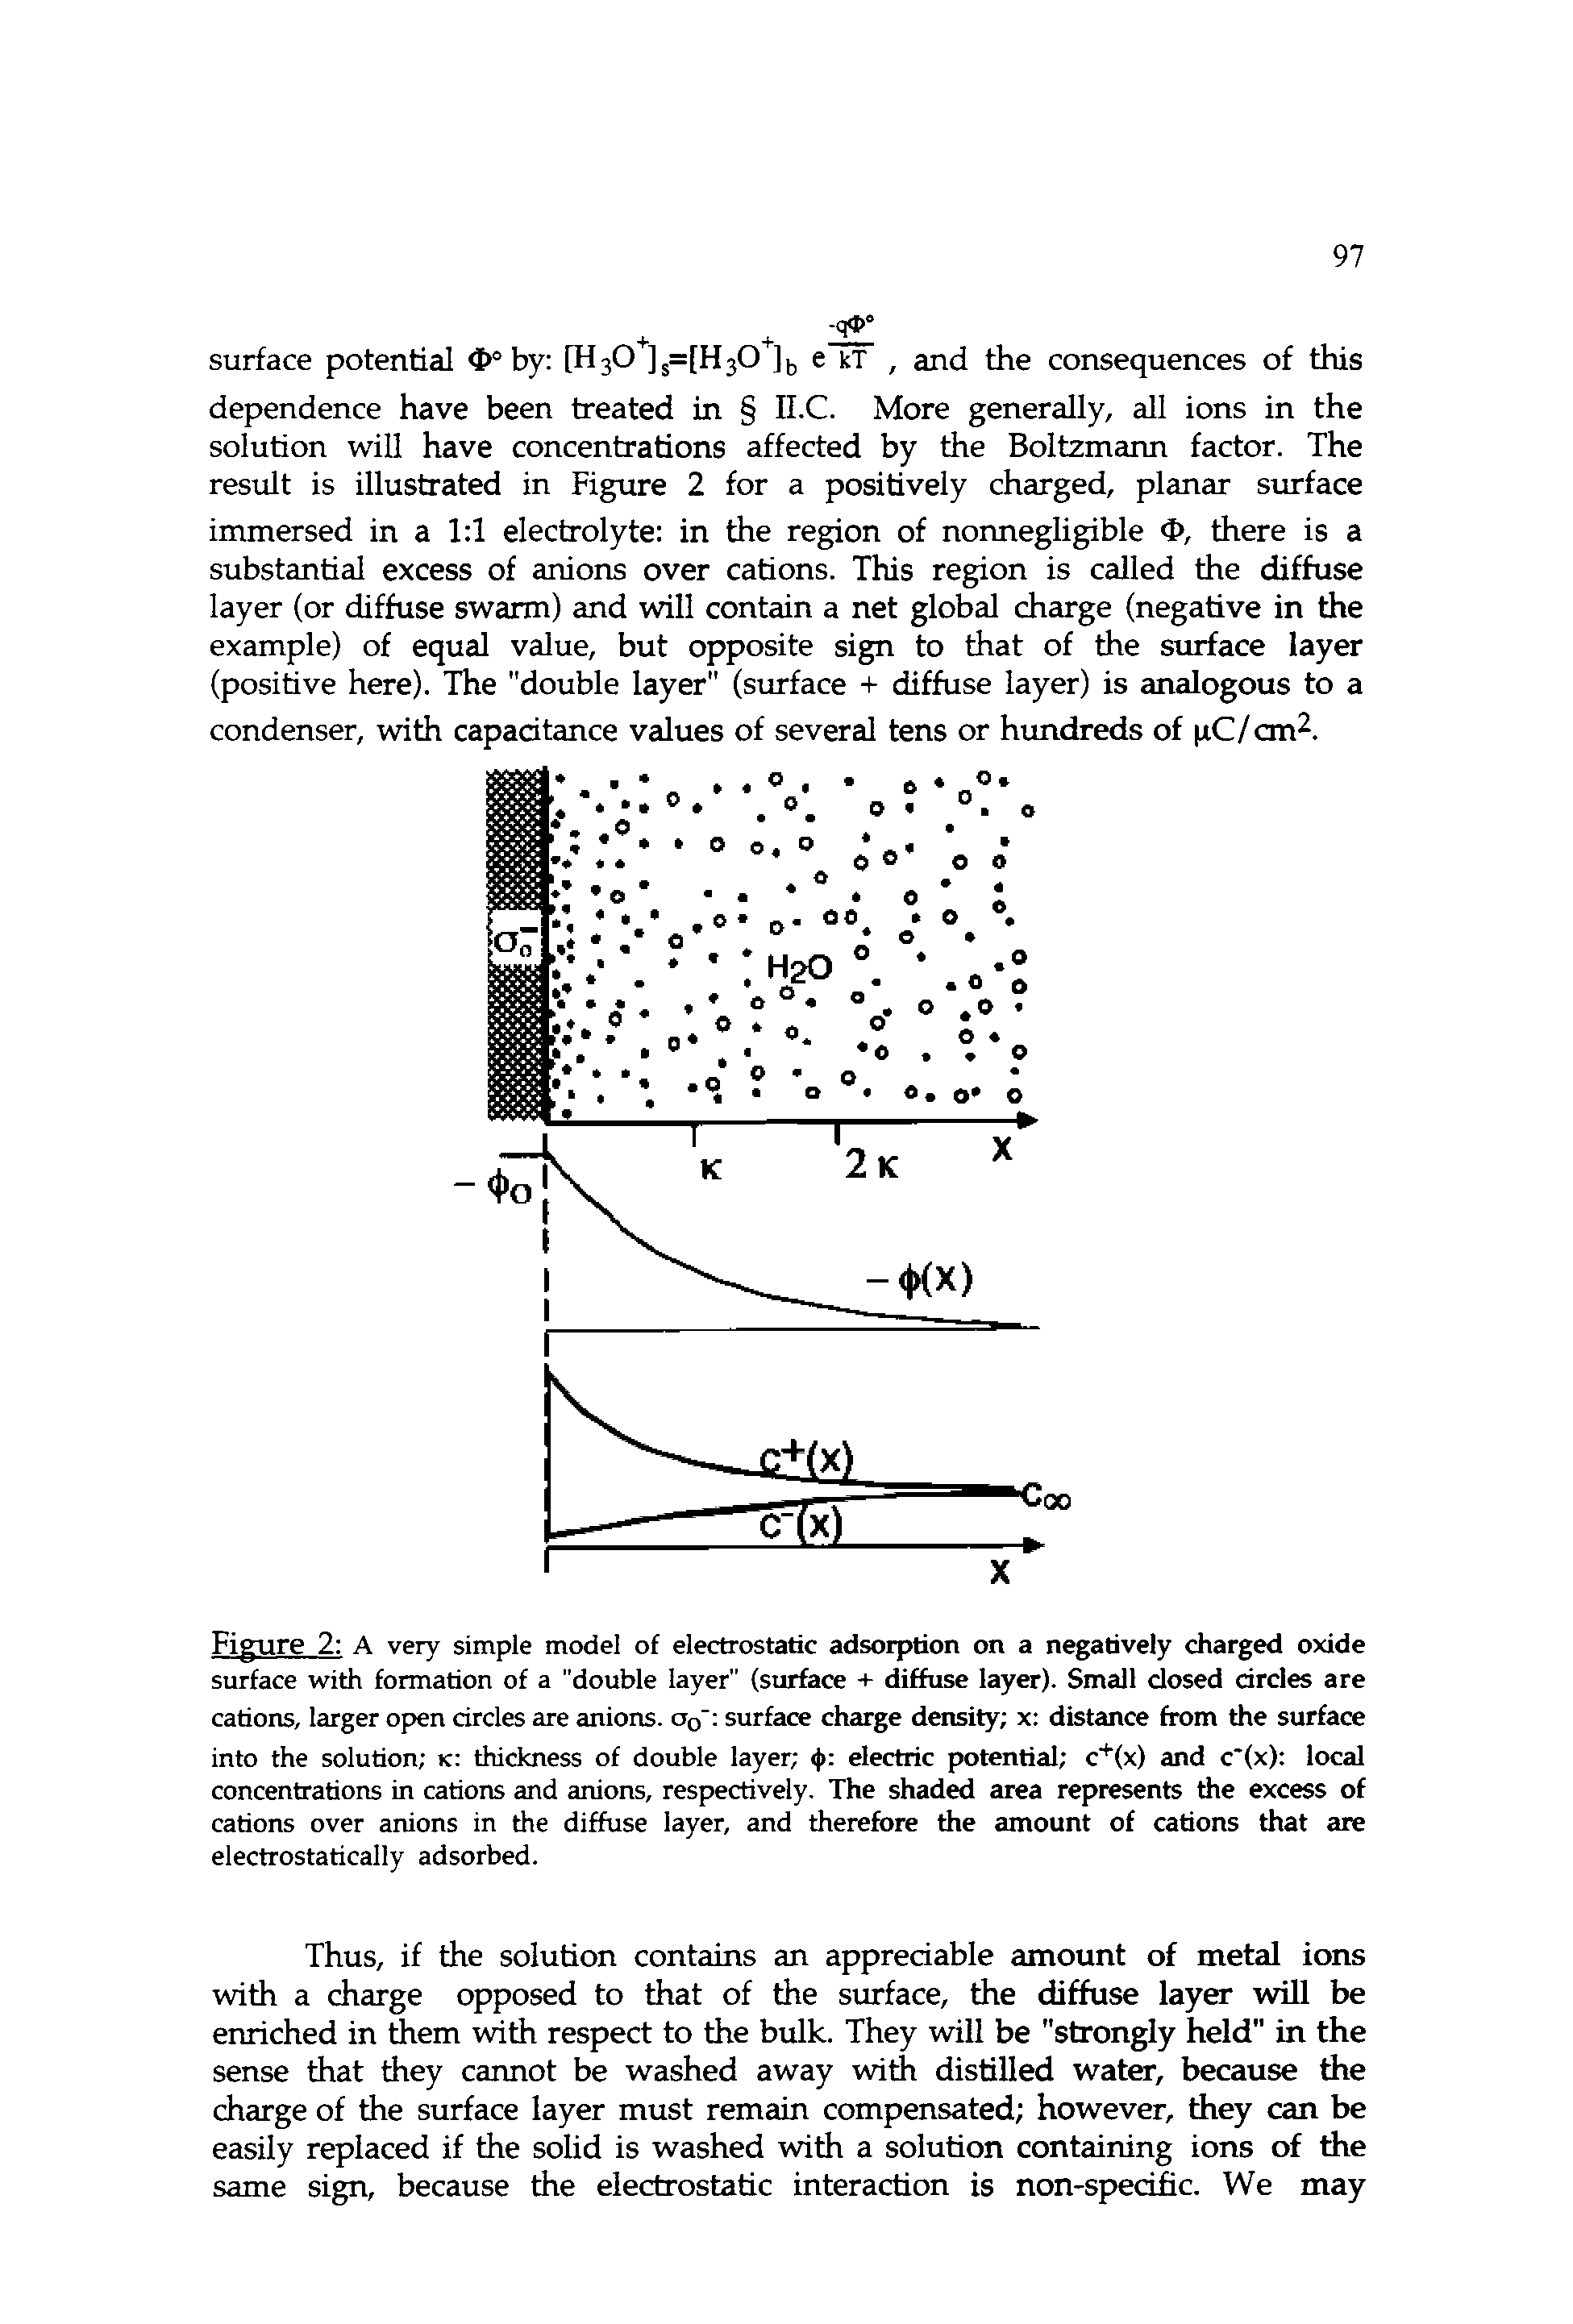 Figure 2 A very simple model of electrostatic adsorption on a negatively charged oxide surface with formation of a "double layer" (surface + diffuse layer). Small dosed drcles are cations, larger open drcles are anions, oq" surface charge density x distance from the surface into the solution k thickness of double layer < ) electric potential c ix) and c (x) local concentrations in cations and anions, respectively. The shaded area represents the excess of cations over anions in the diffuse layer, and therefore the amount of cations that are electrostatically adsorbed.